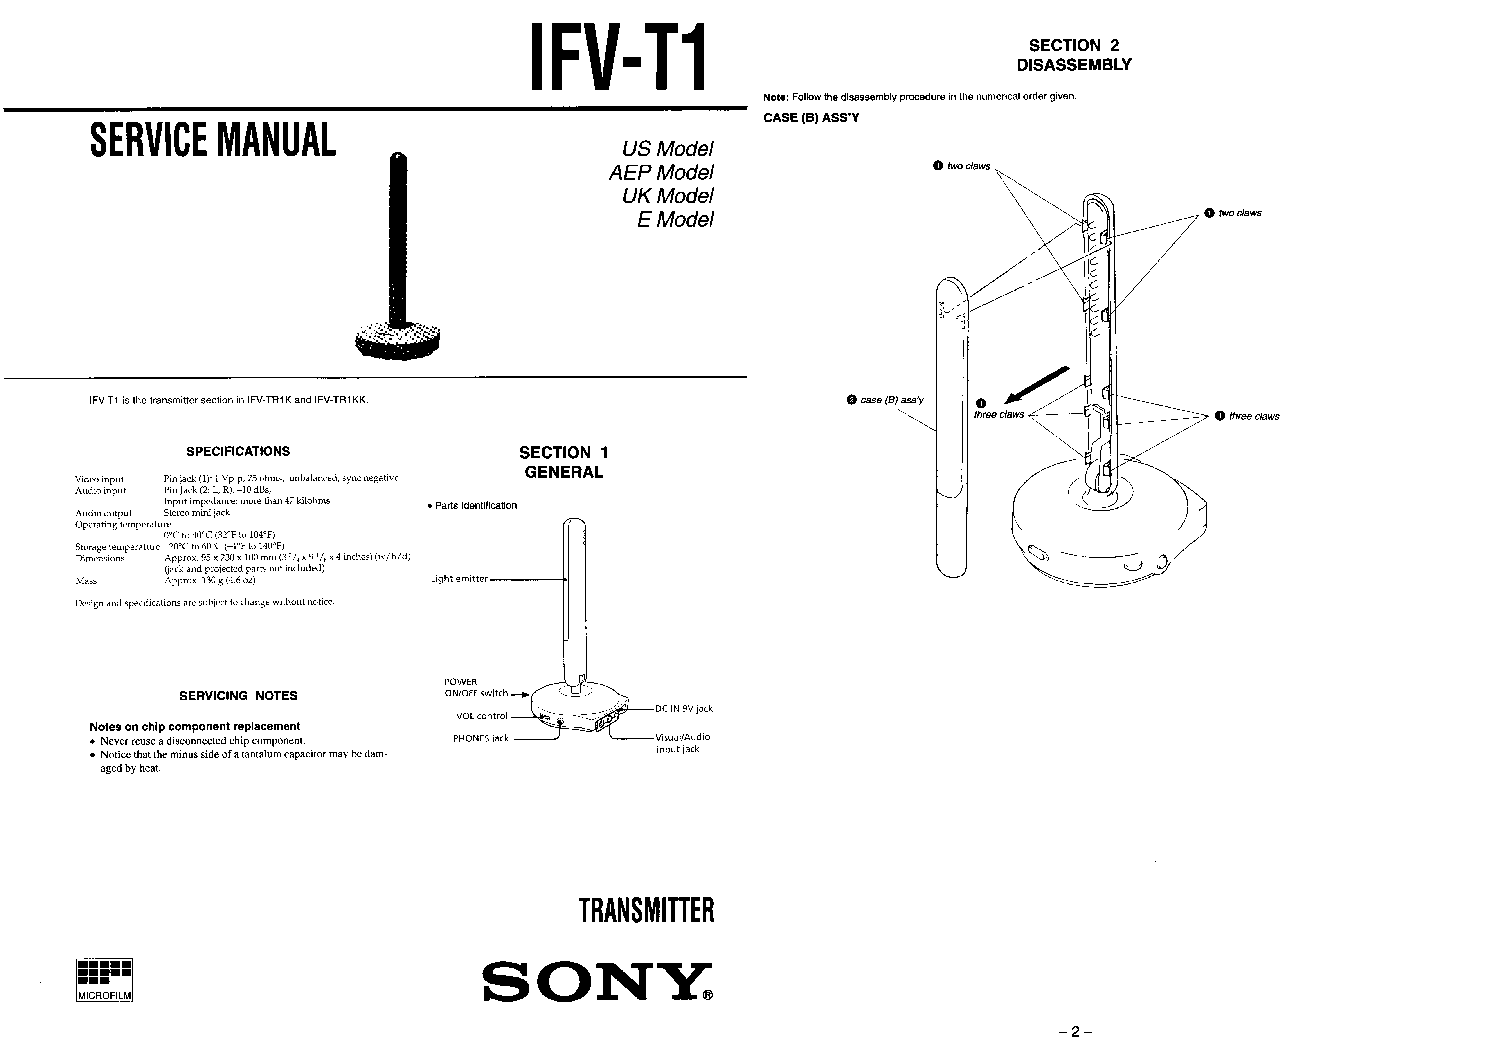 SONY IFV-T1 service manual (1st page)